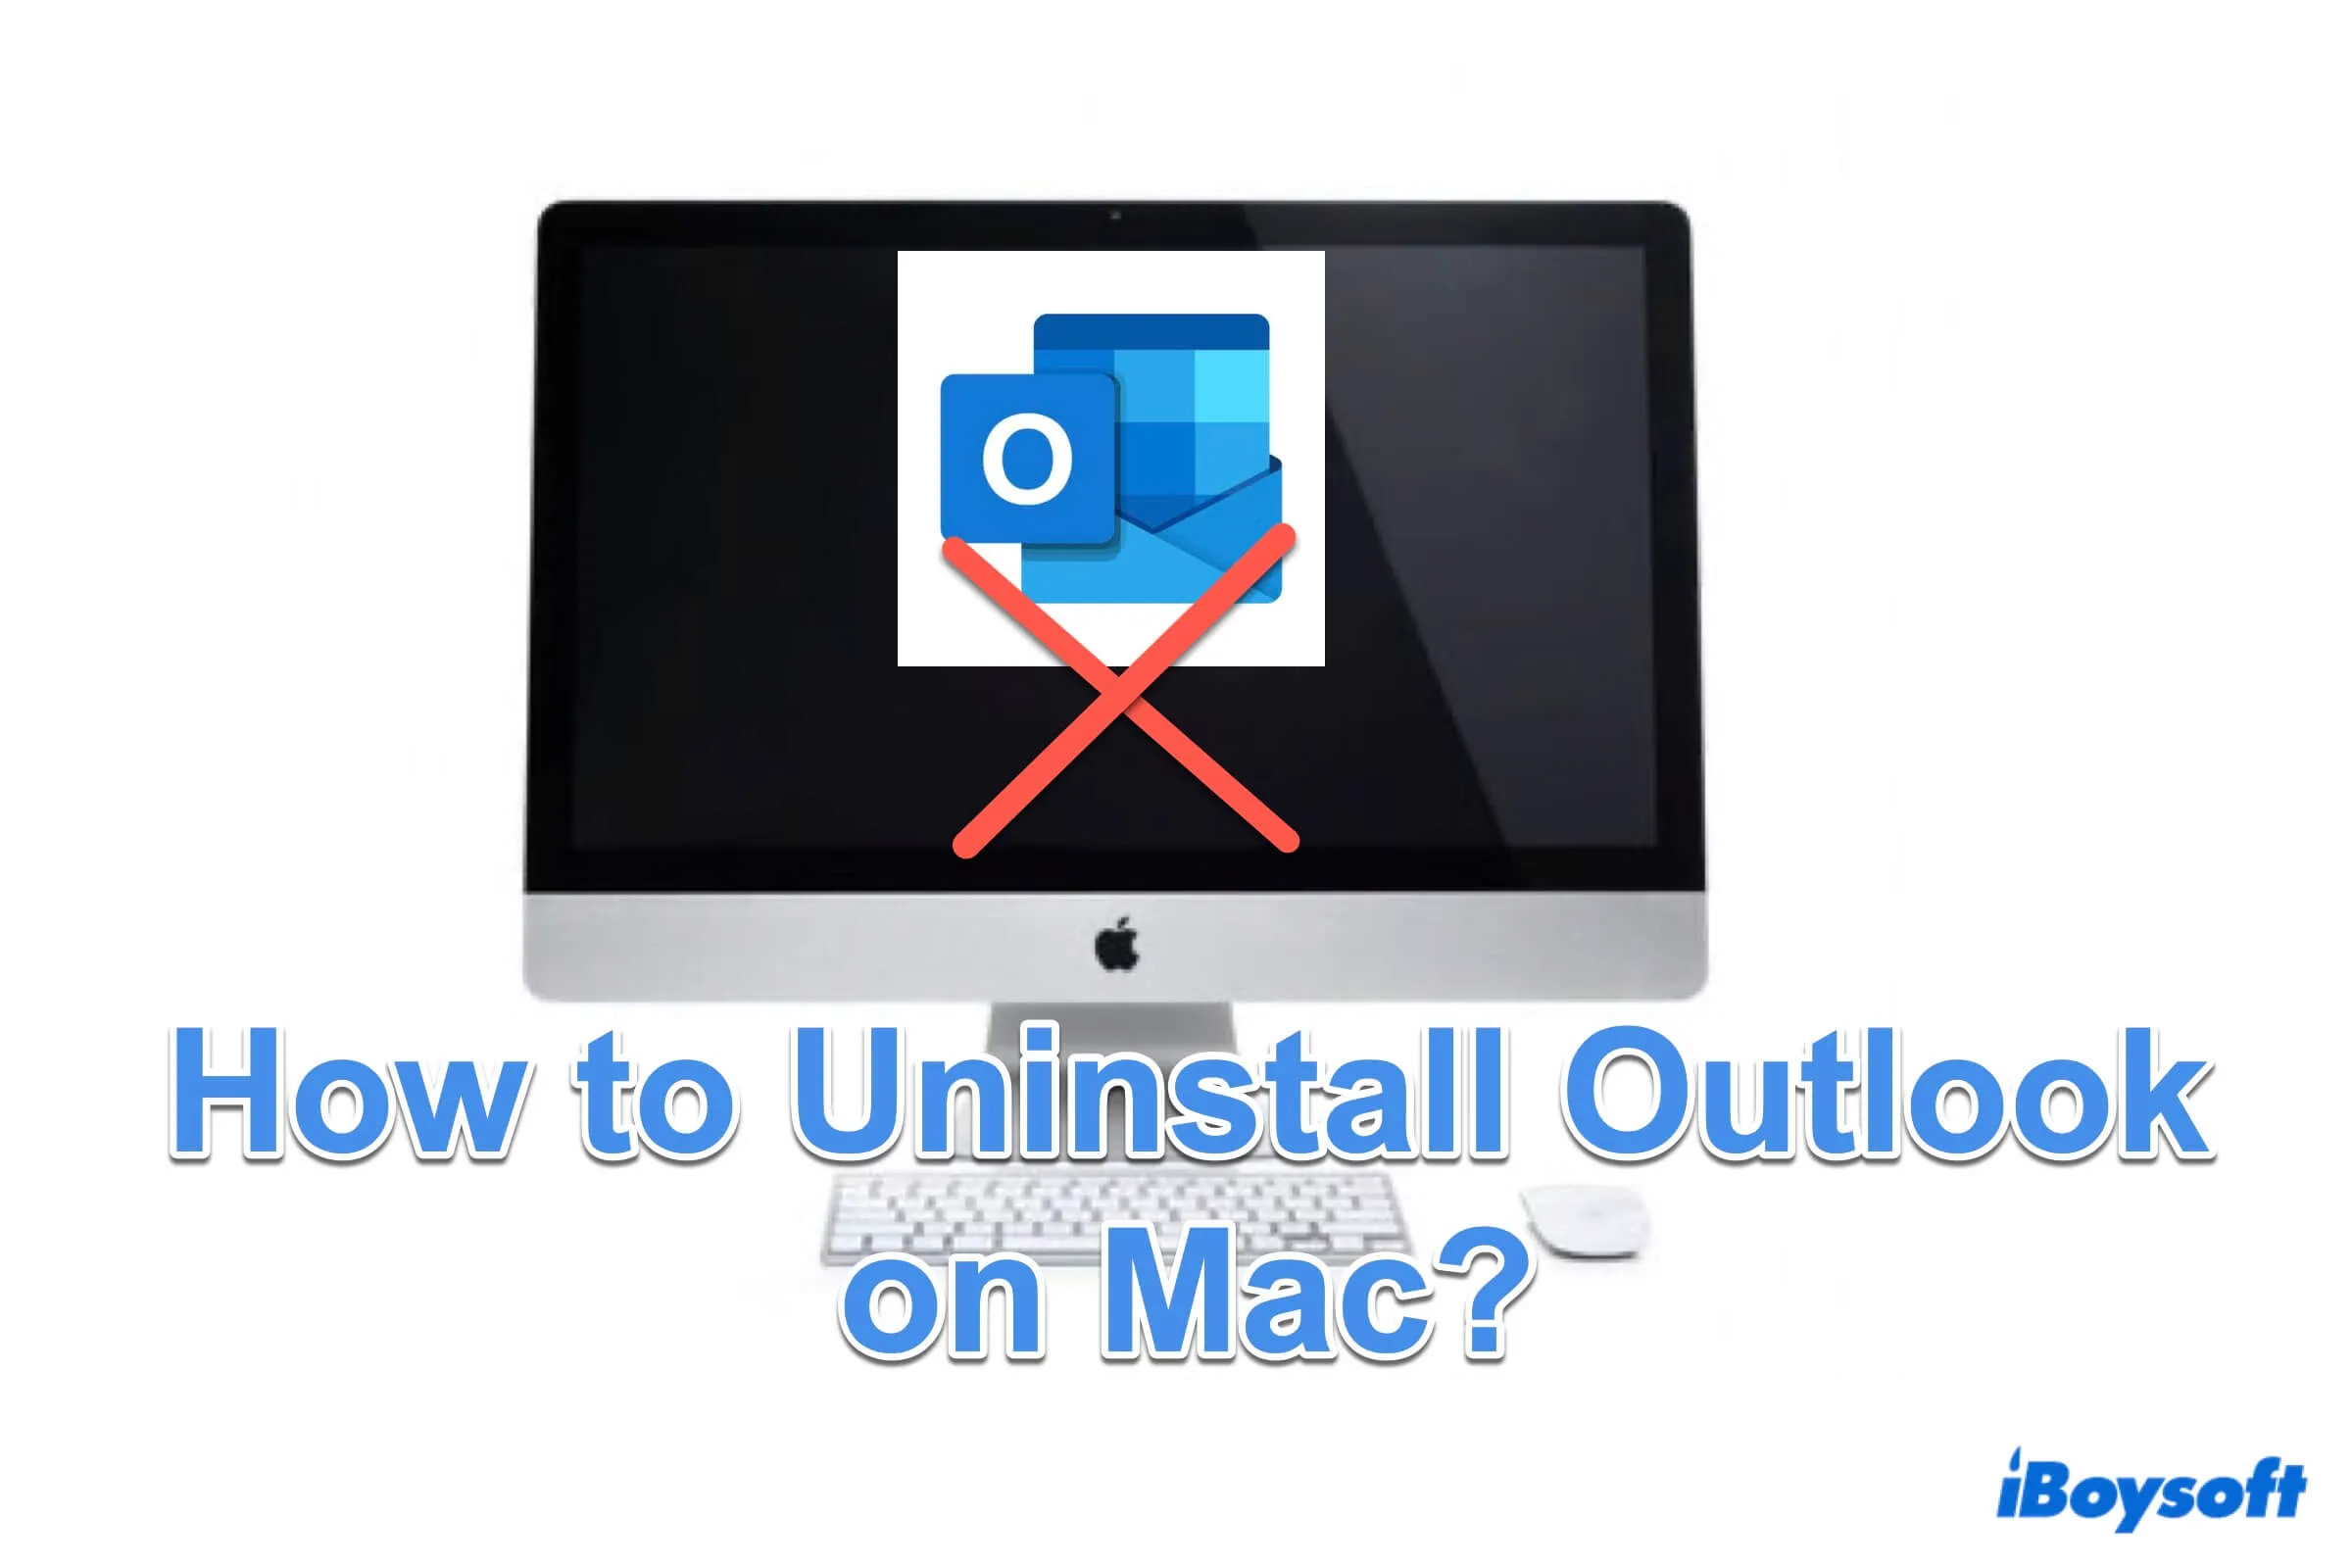 Summary of How to Uninstall Outlook on Mac